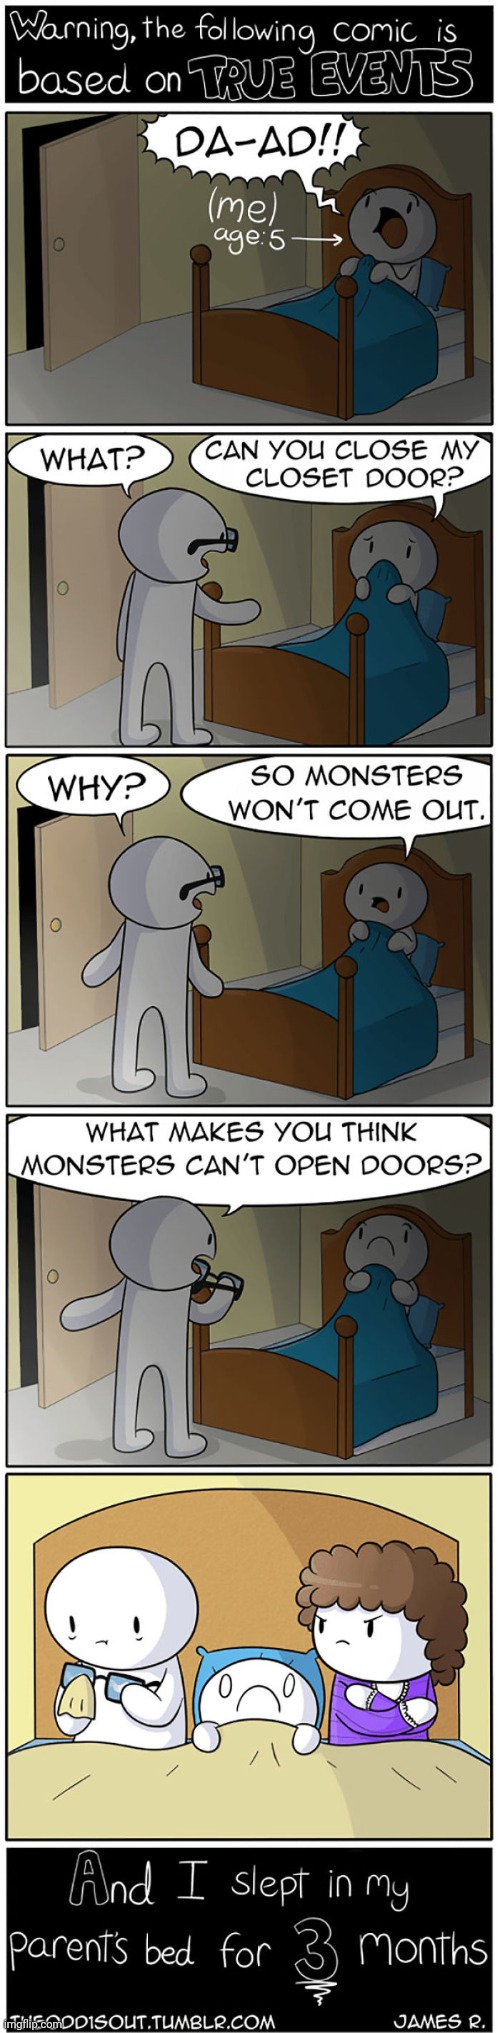 793 | image tagged in theodd1sout,kids,relatable,monsters,comics/cartoons,comics | made w/ Imgflip meme maker